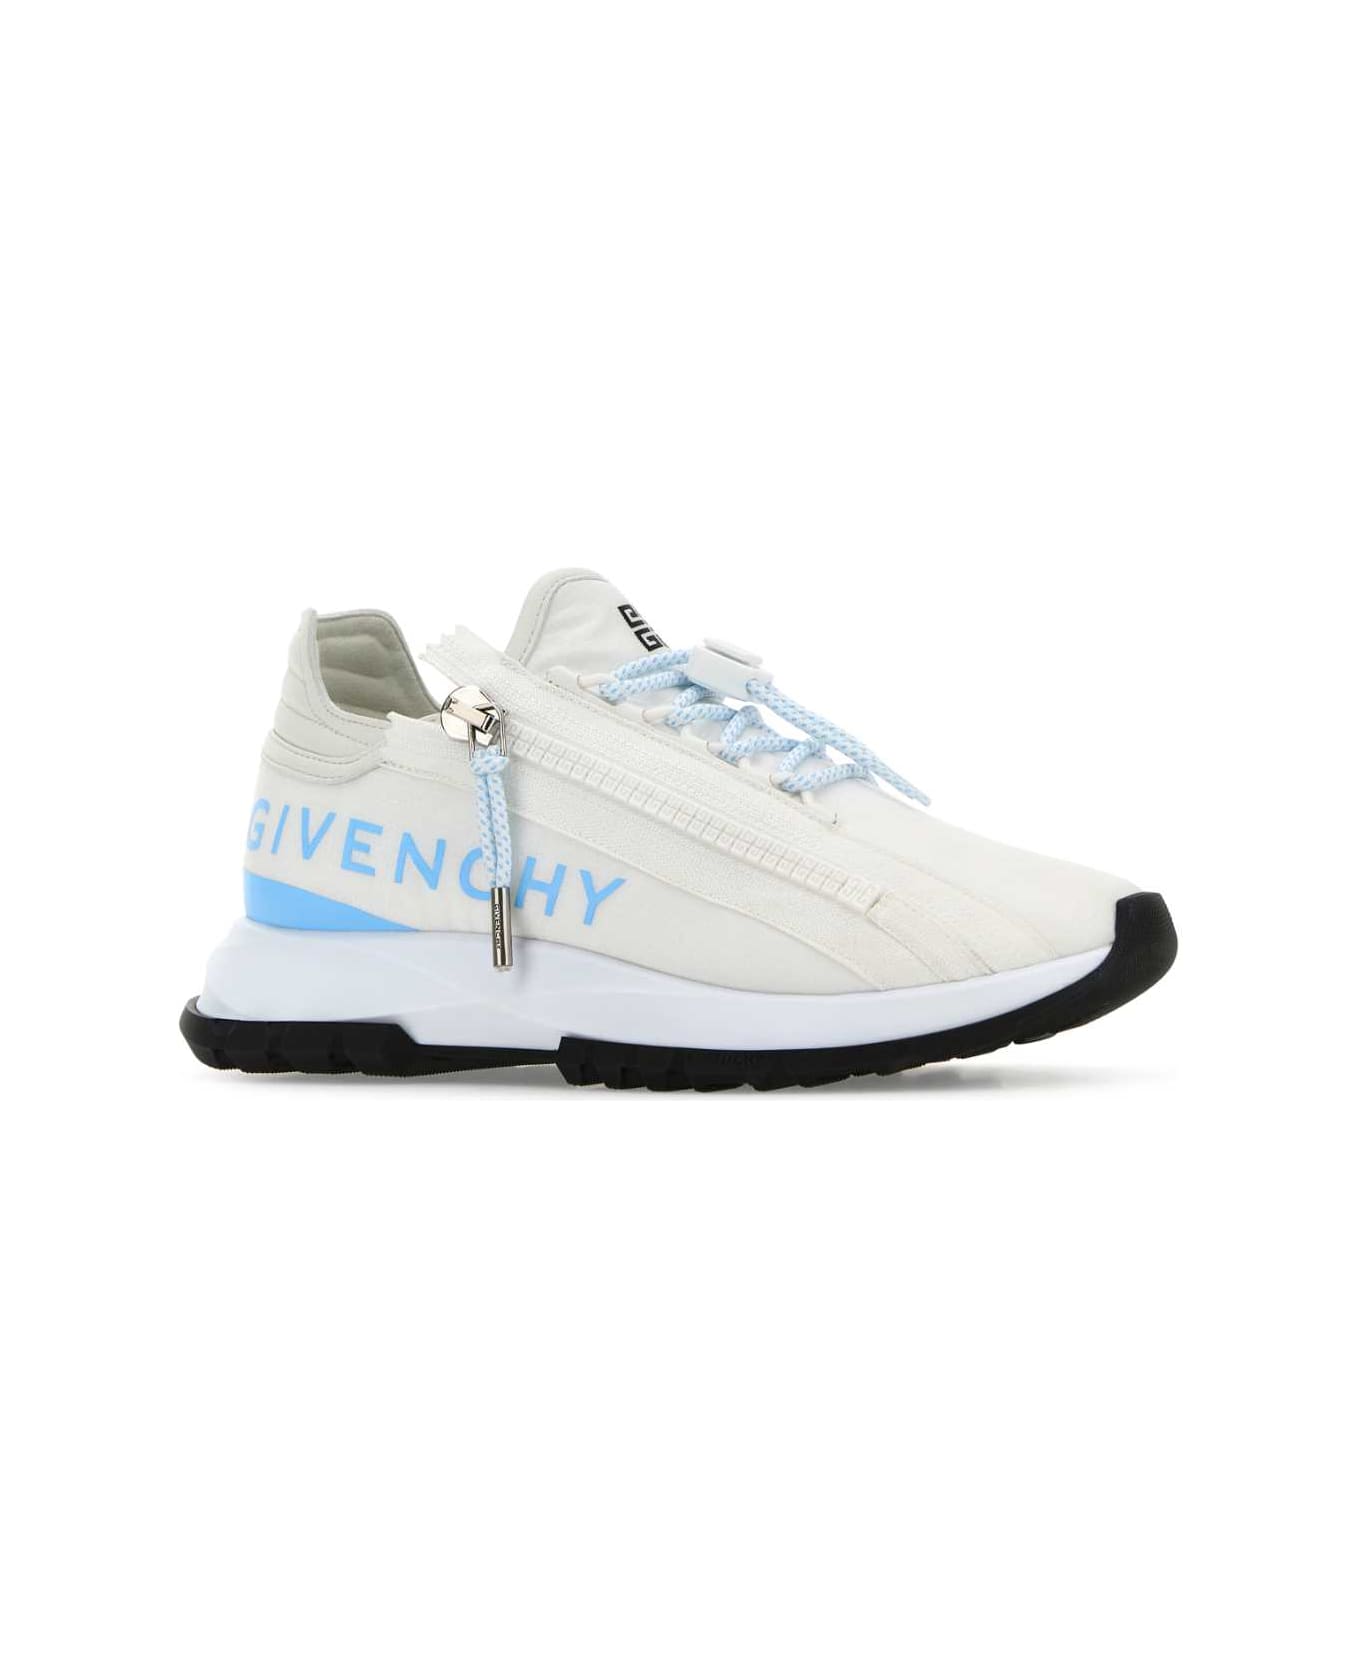 Givenchy White Fabric And Leather Spectre Sneakers - WHITEBLUE